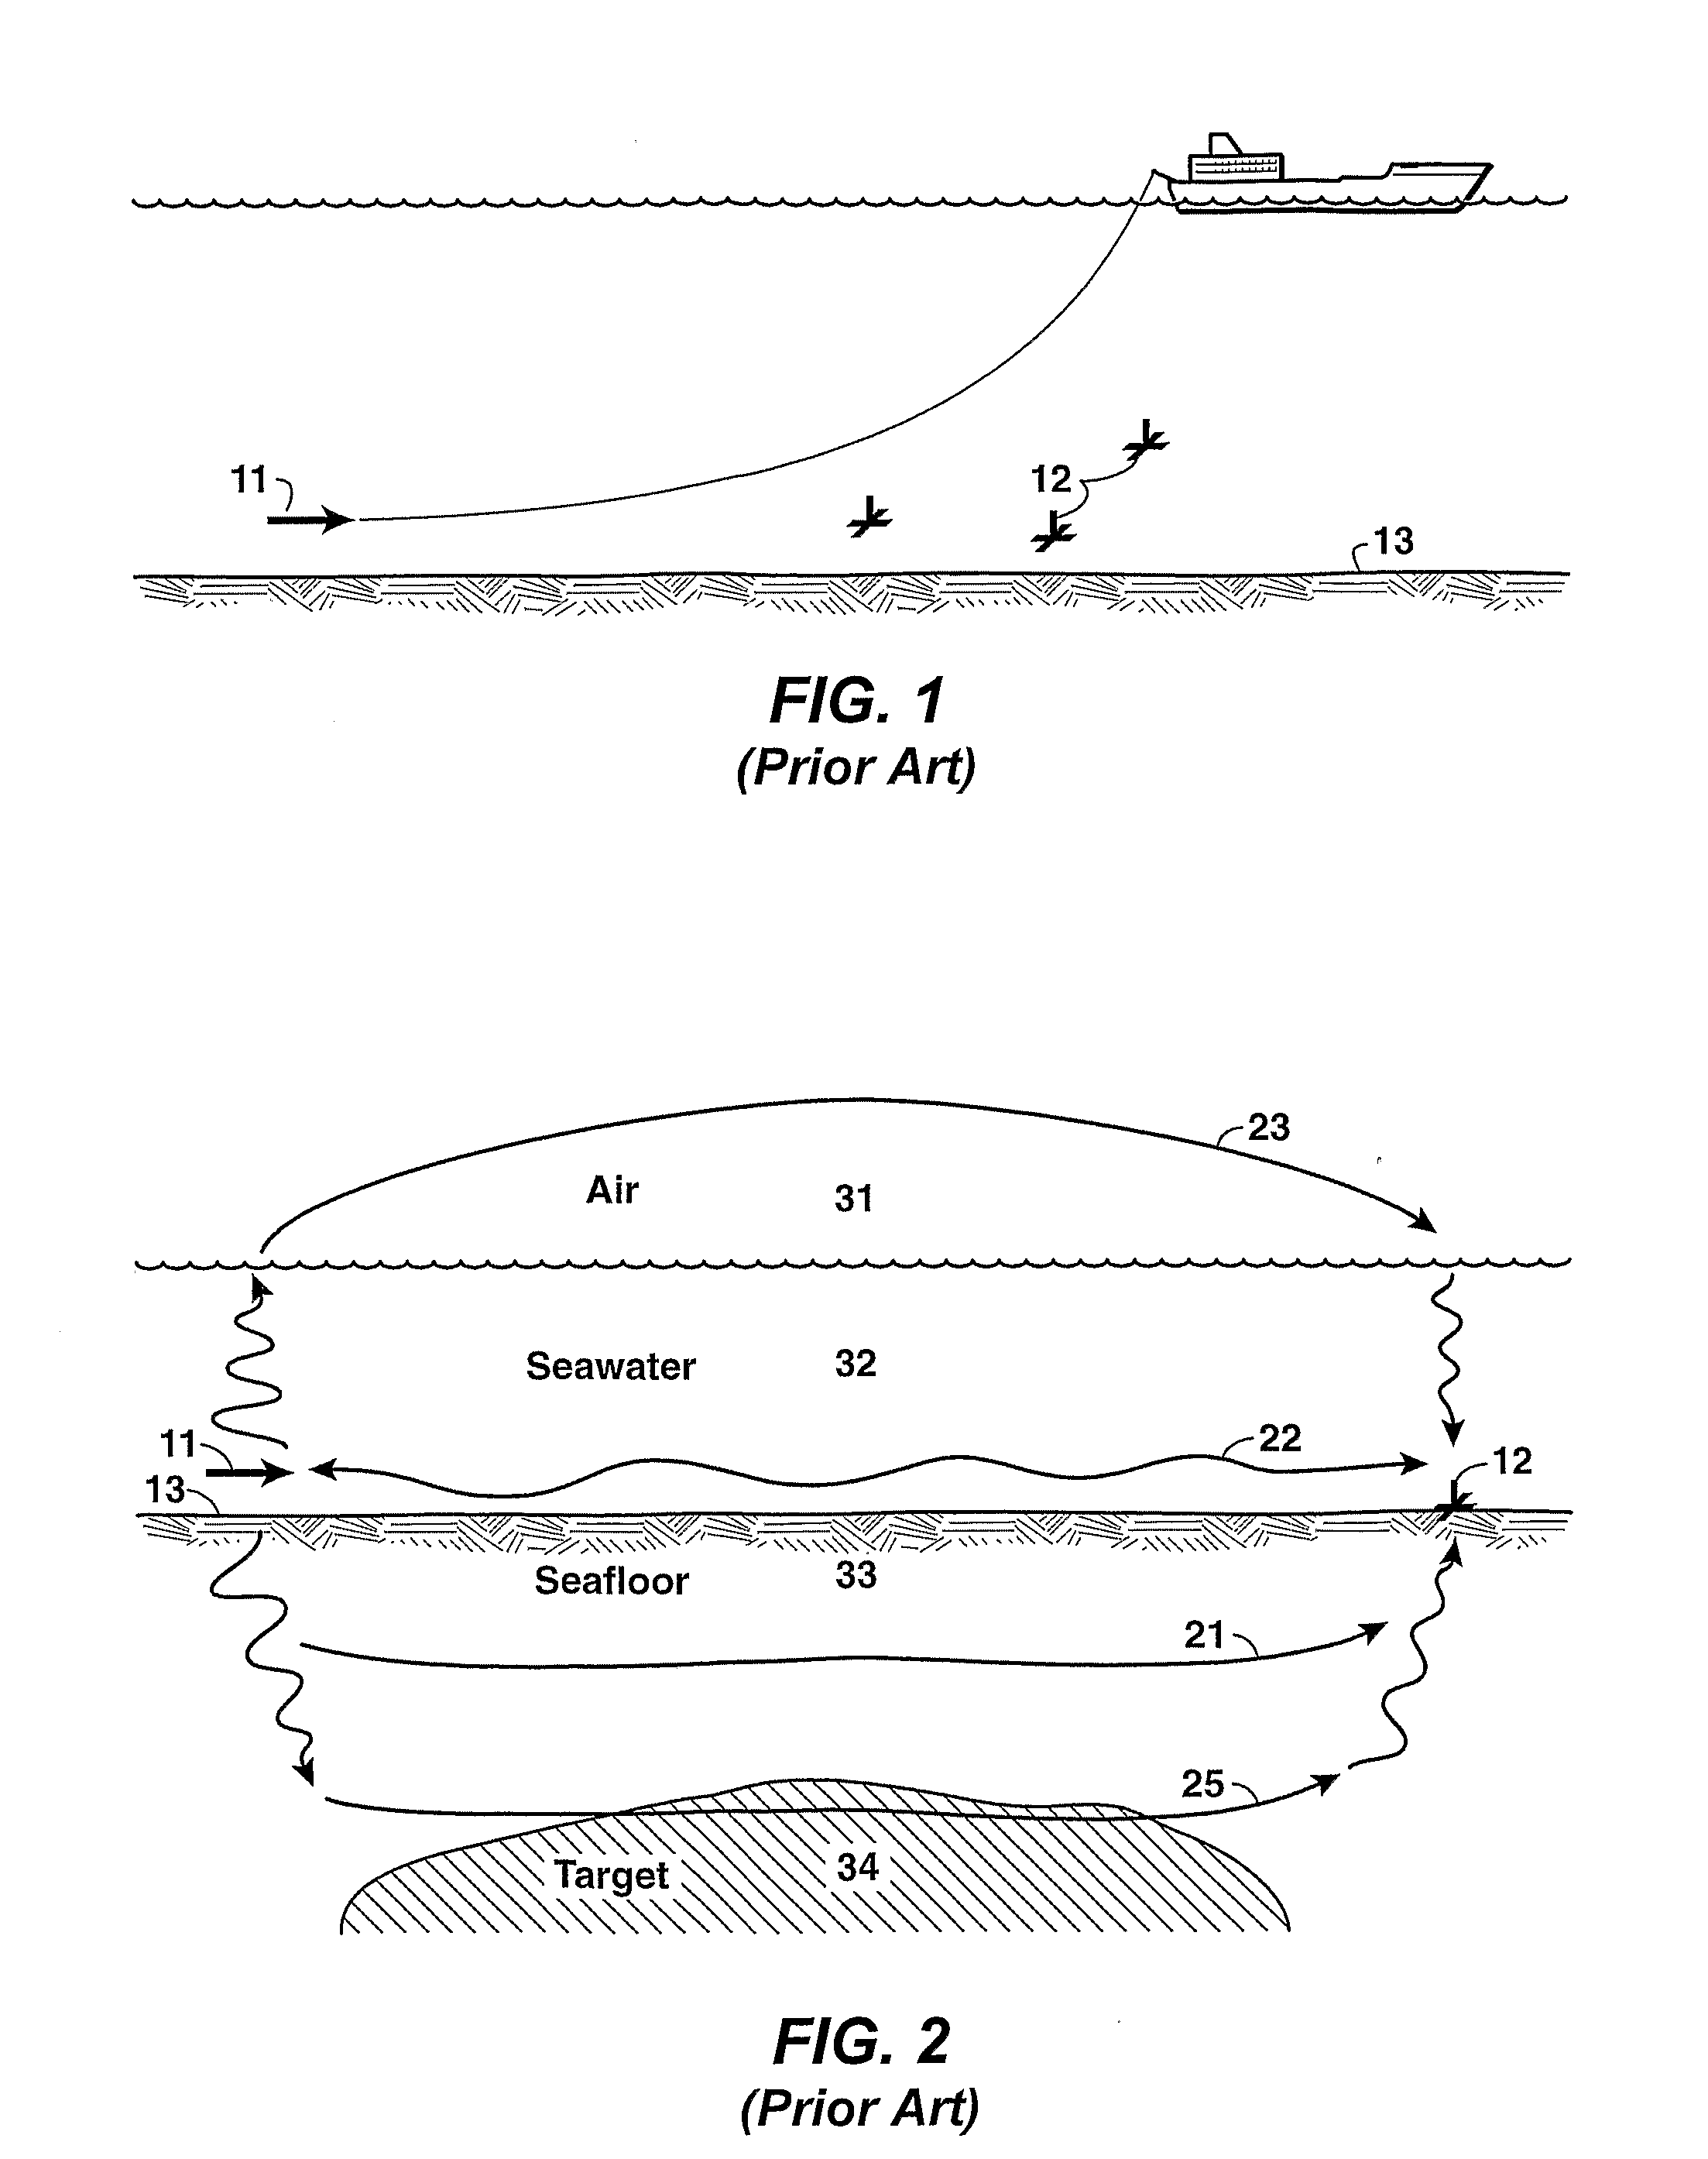 Method for electromagnetic air-wave suppression by active cancellation and shielding